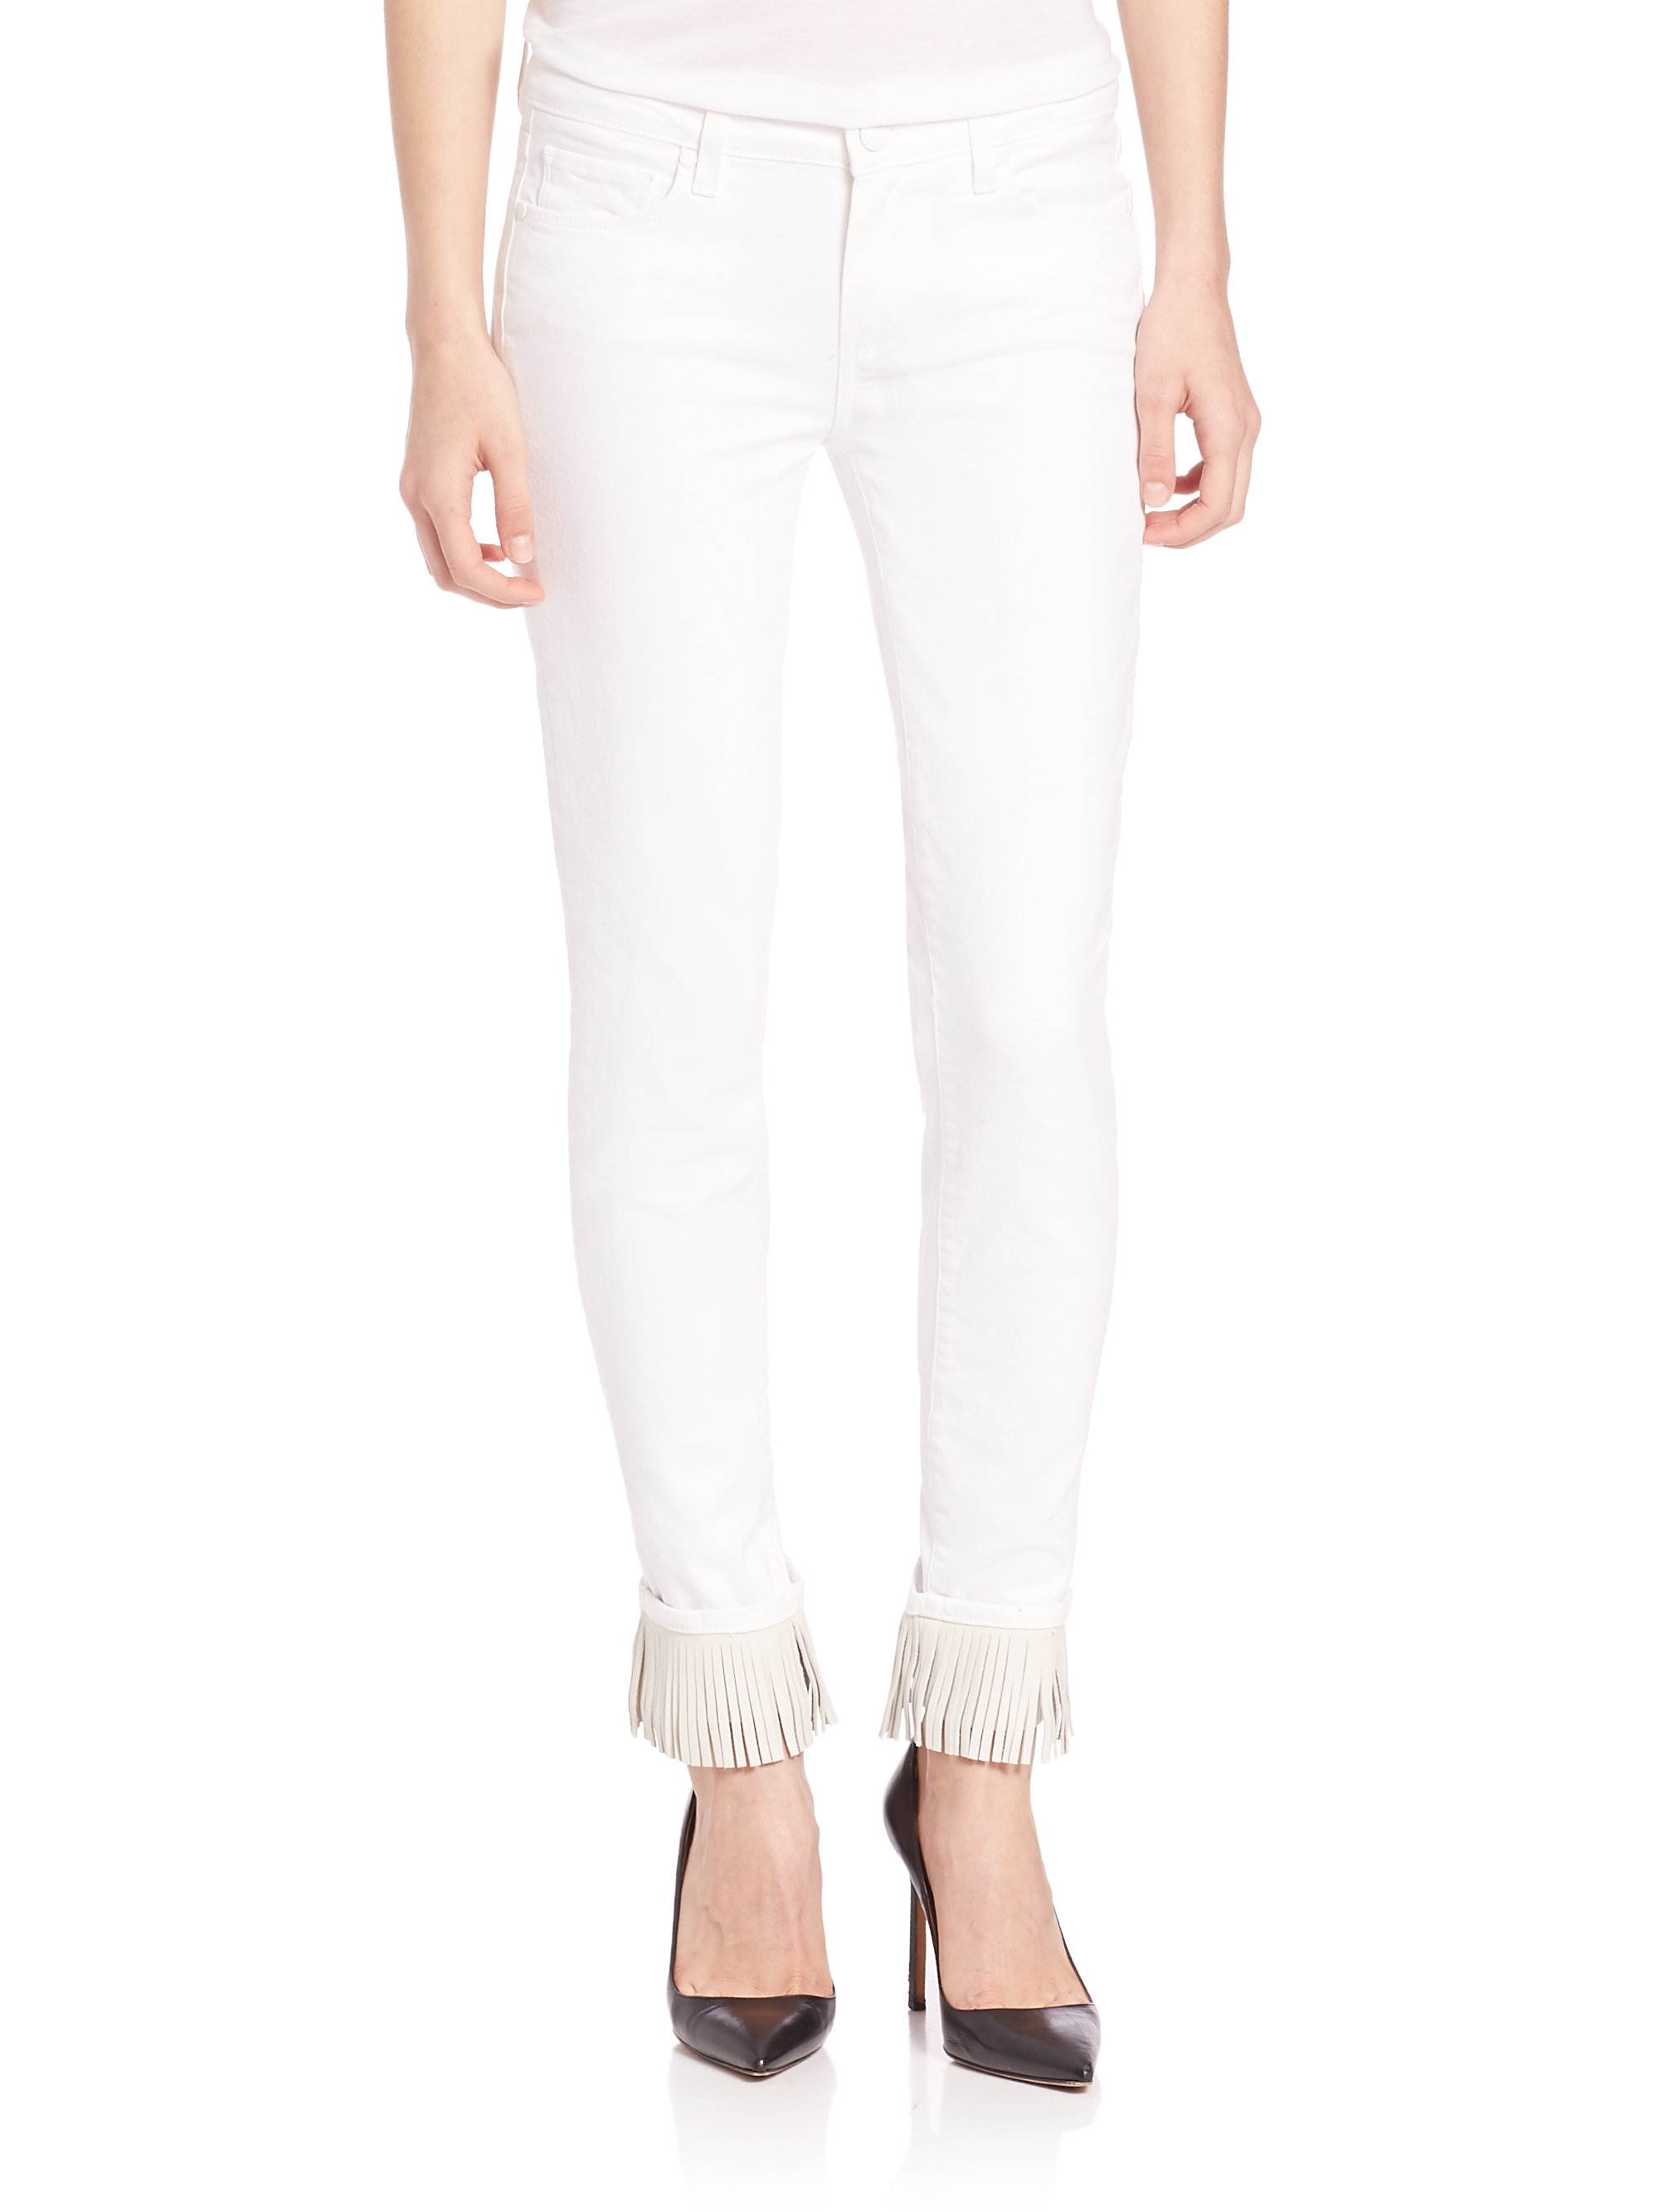 white jeans with fringe at bottom